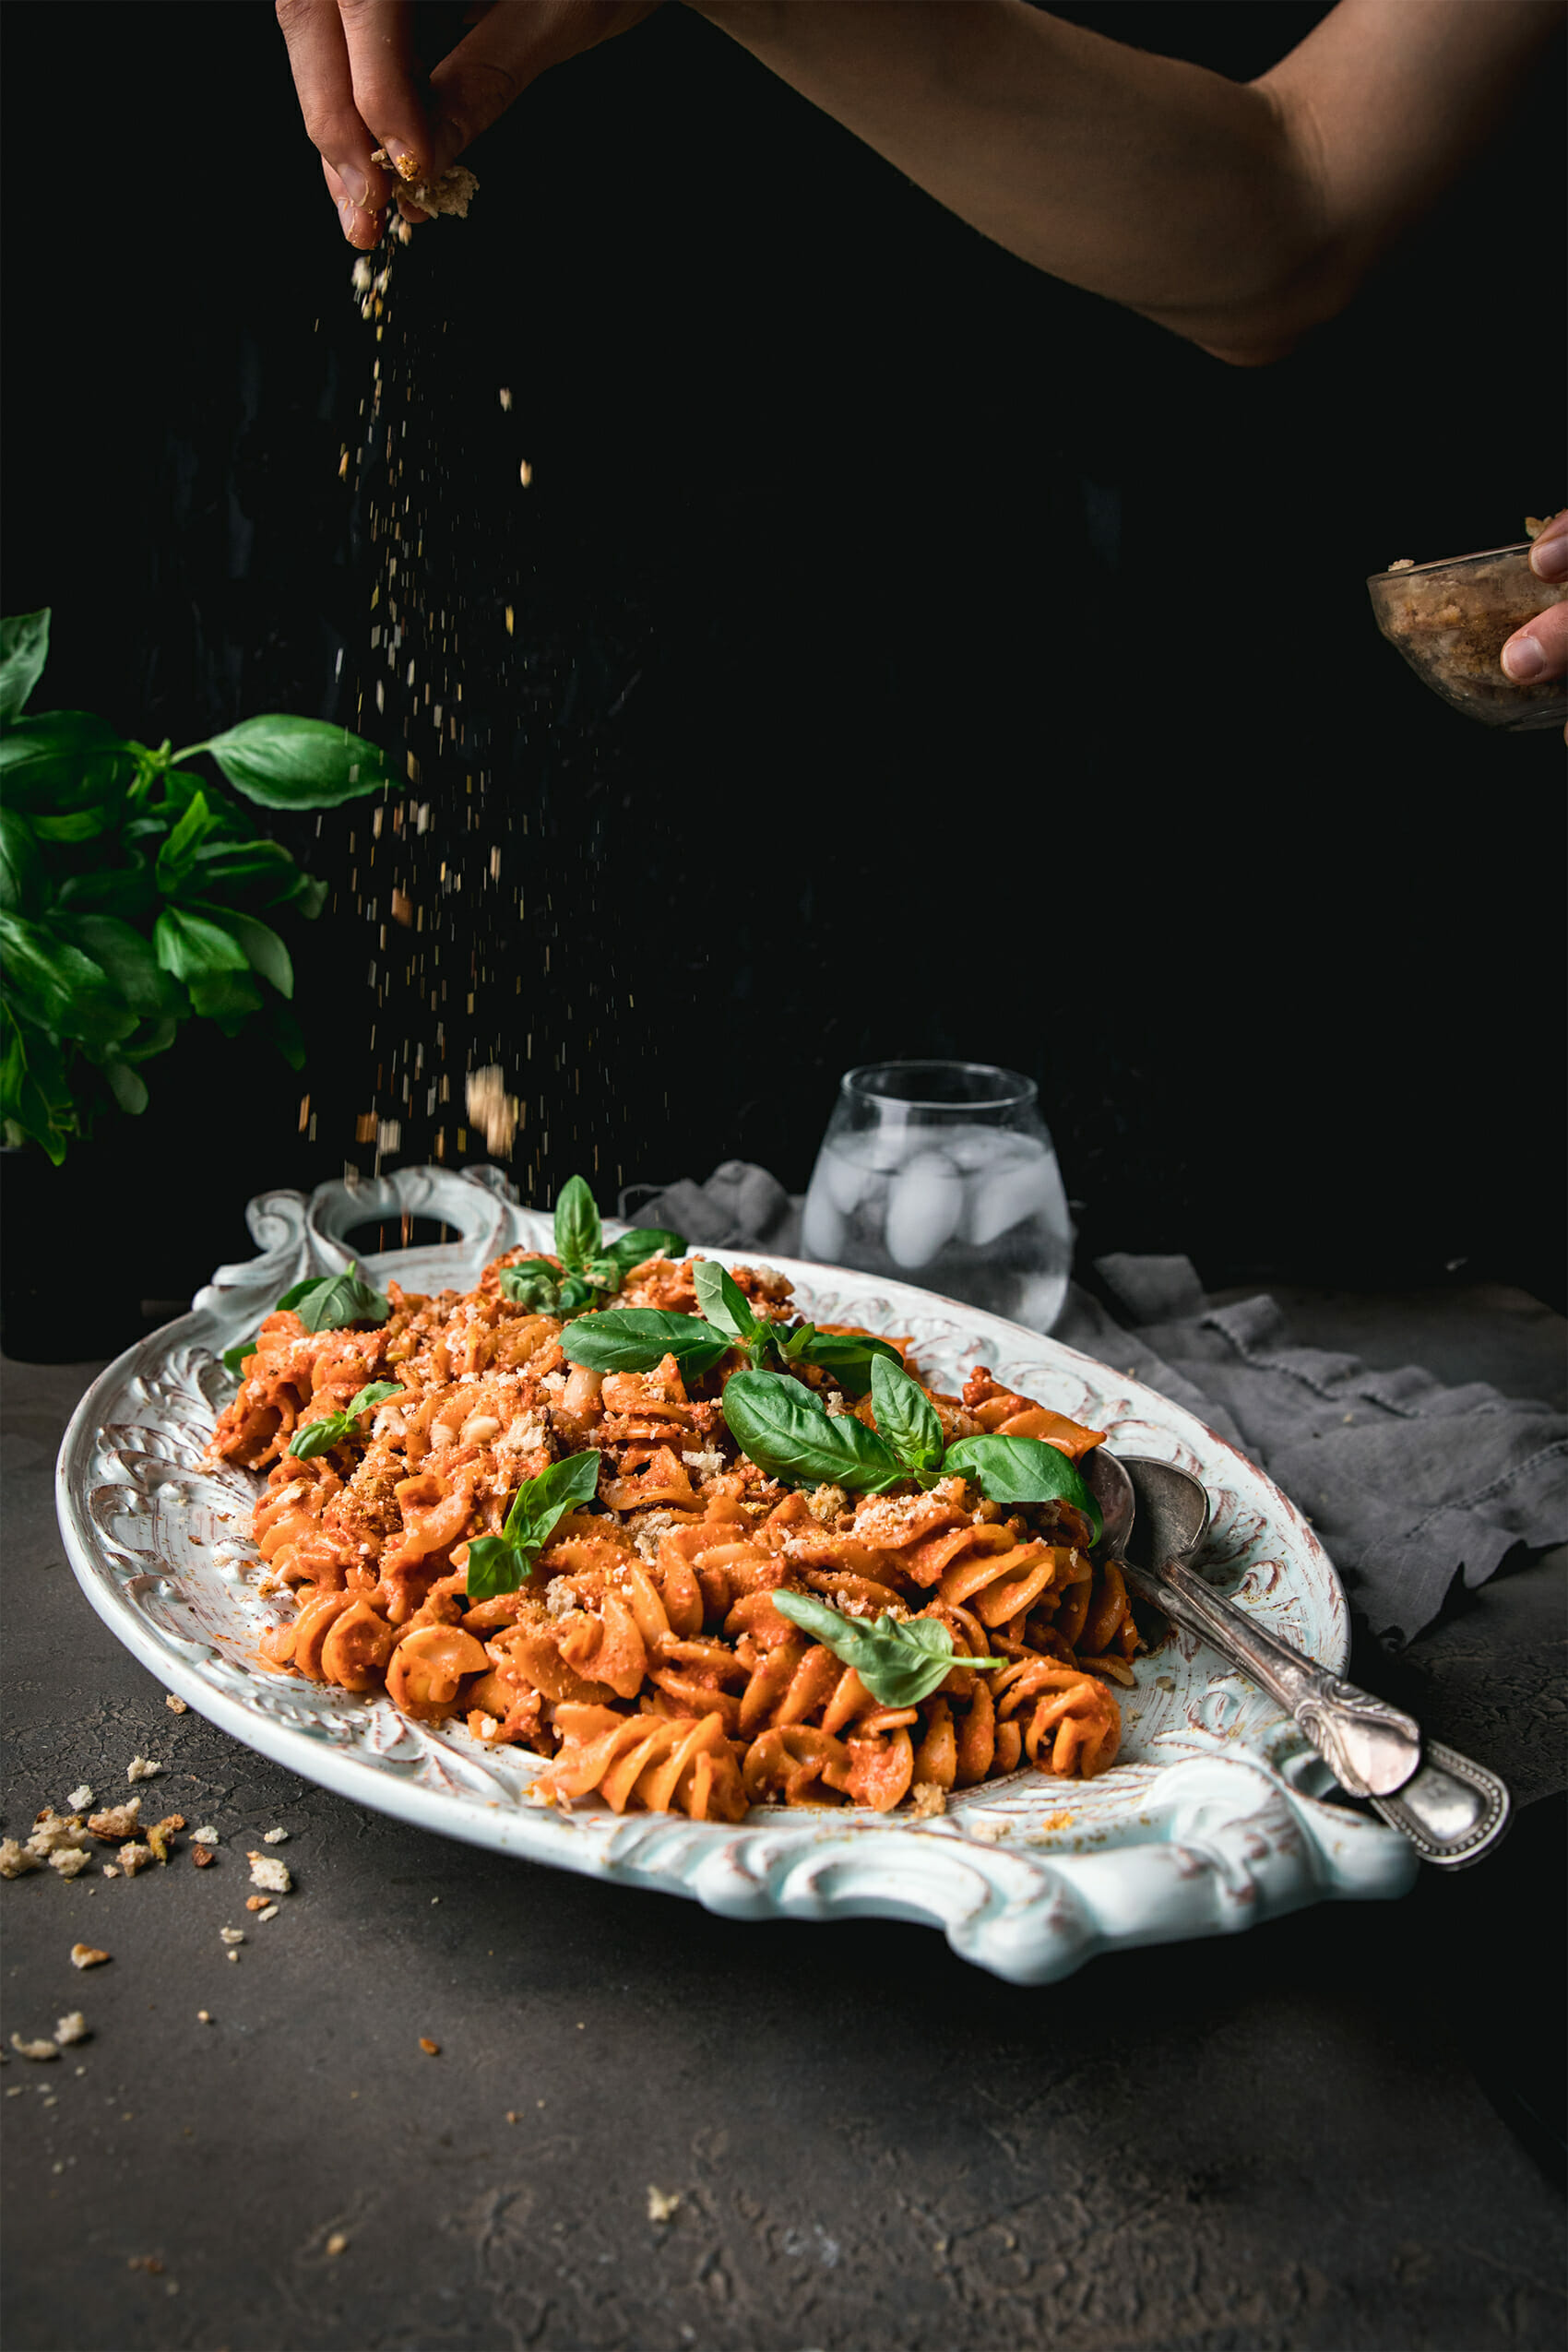 hand holding breadcrumbs sprinkled onto a plate of roasted red pepper pasta salad